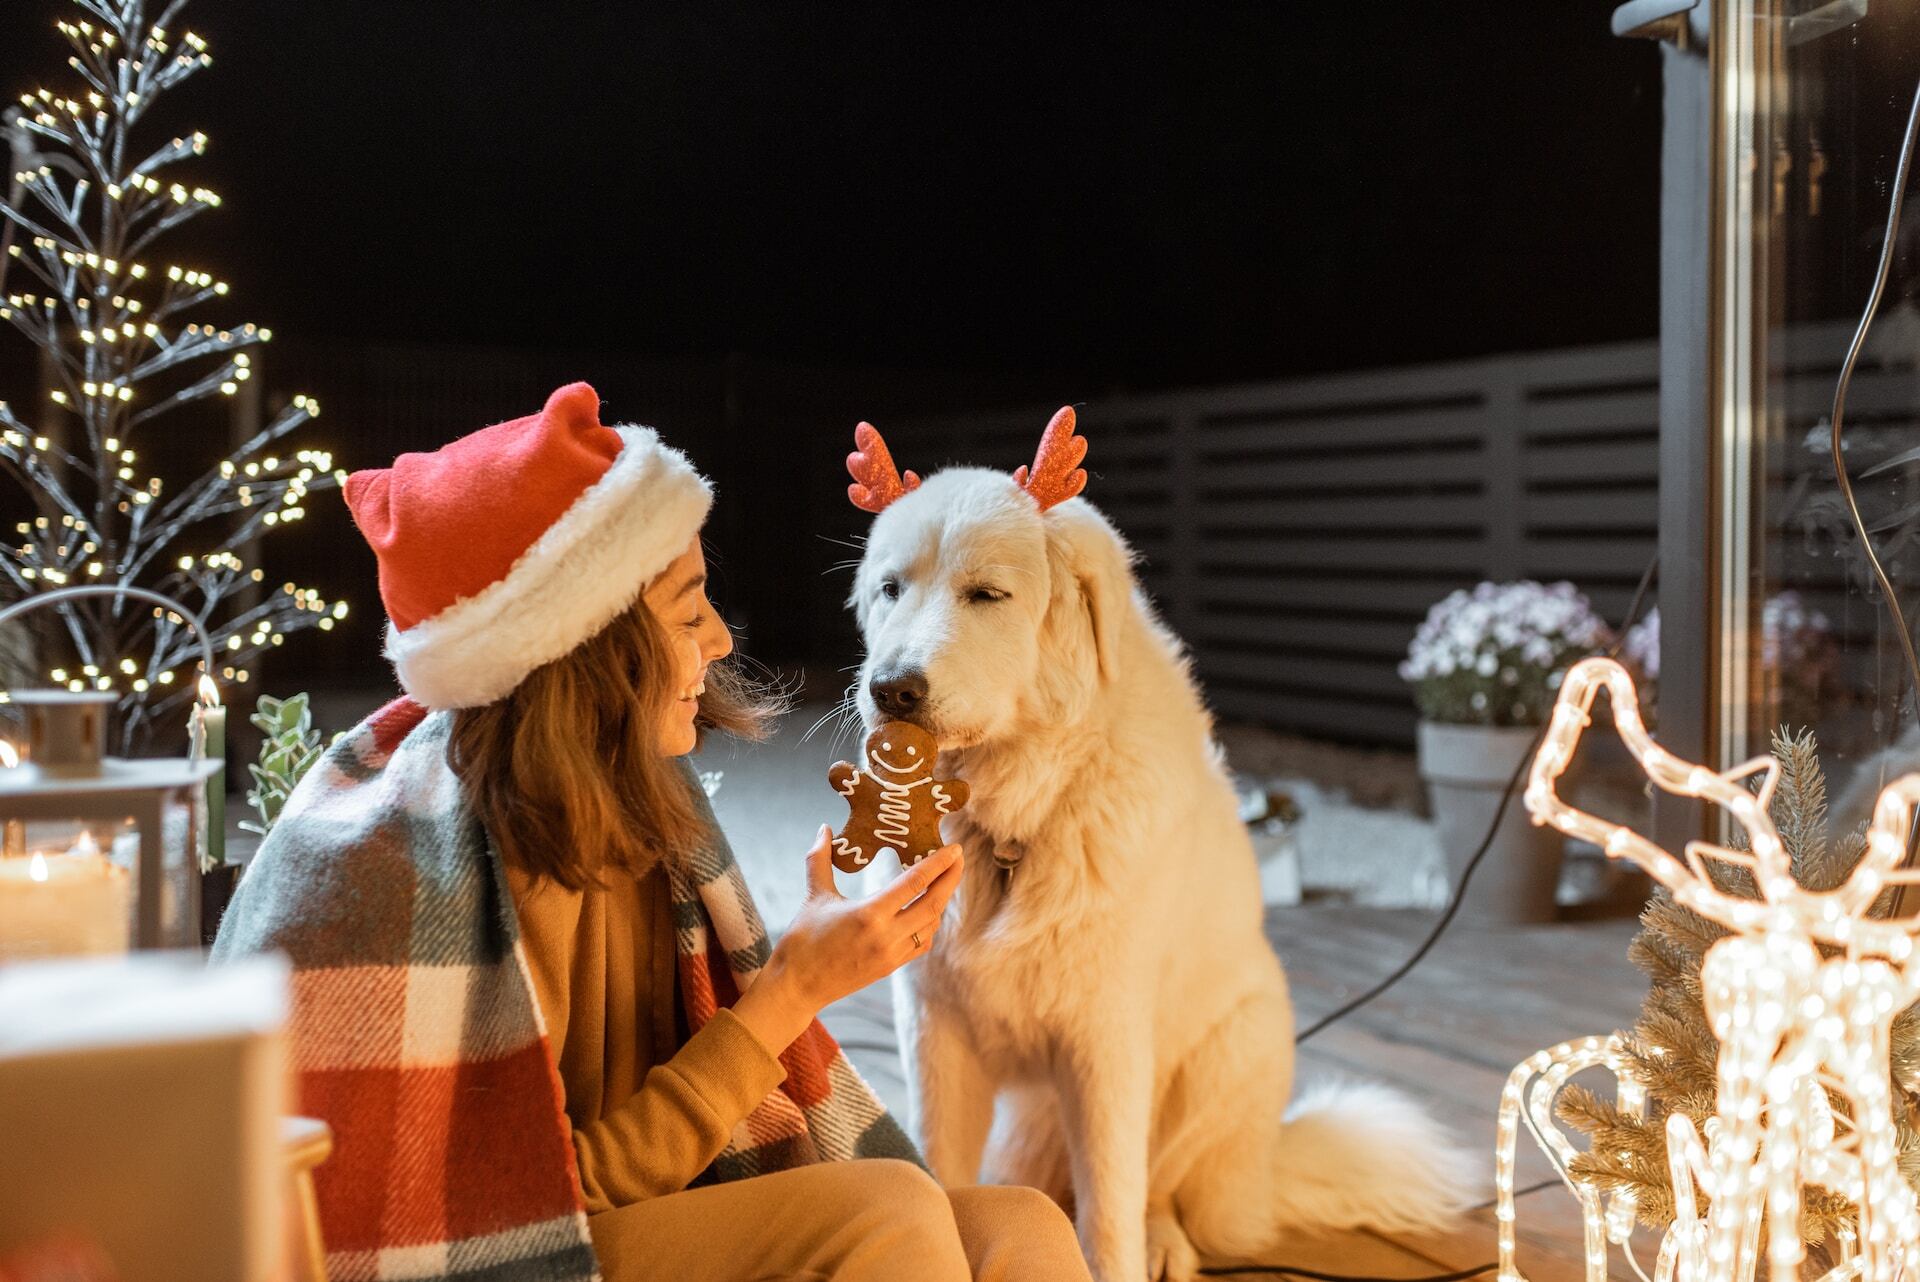 A woman in a Santa hat offering a cookie to a dog wearing reindeer antlers